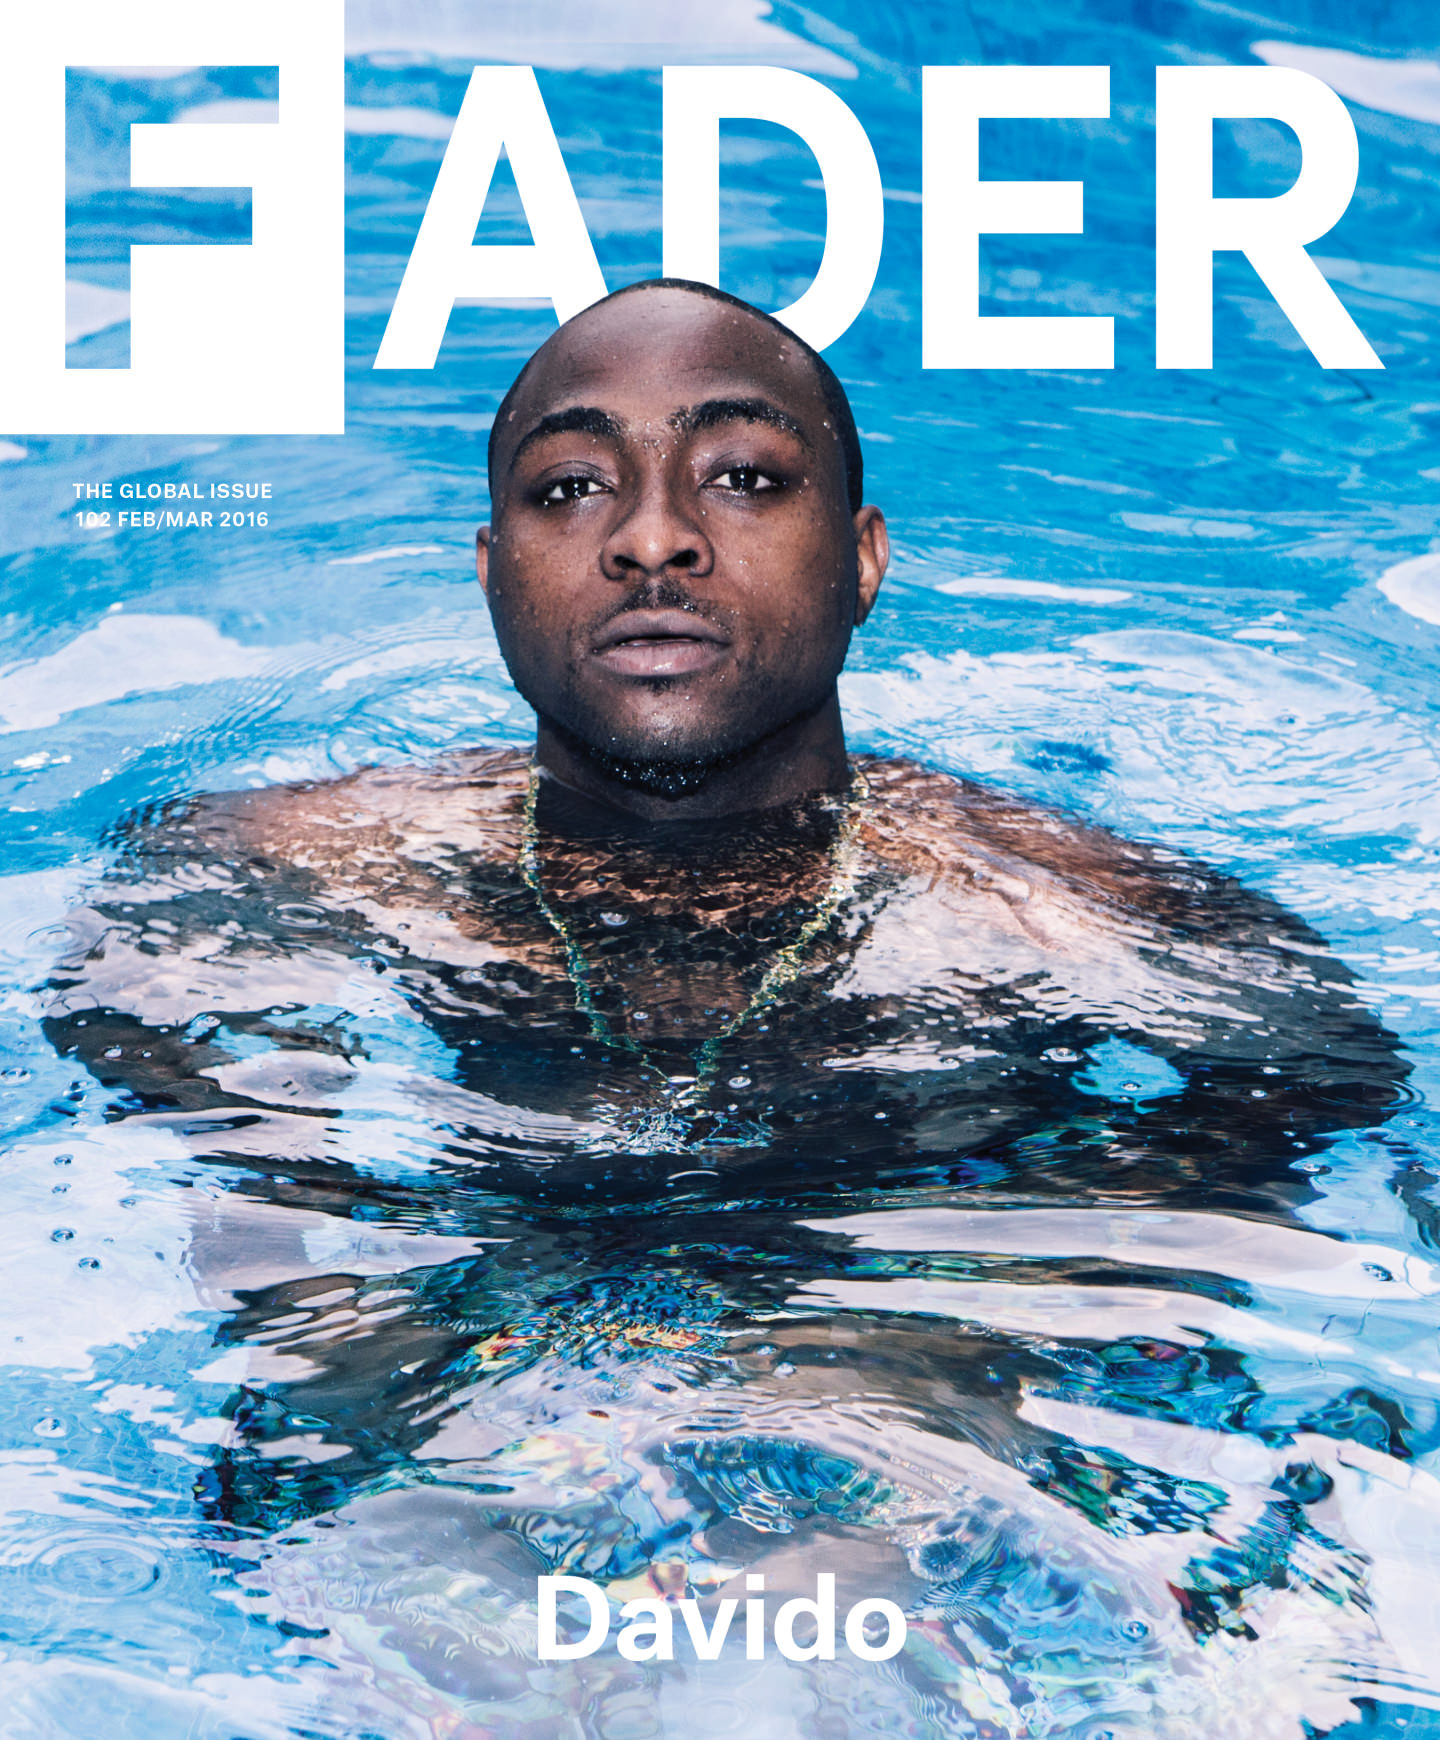 Davido cover star for The FADER